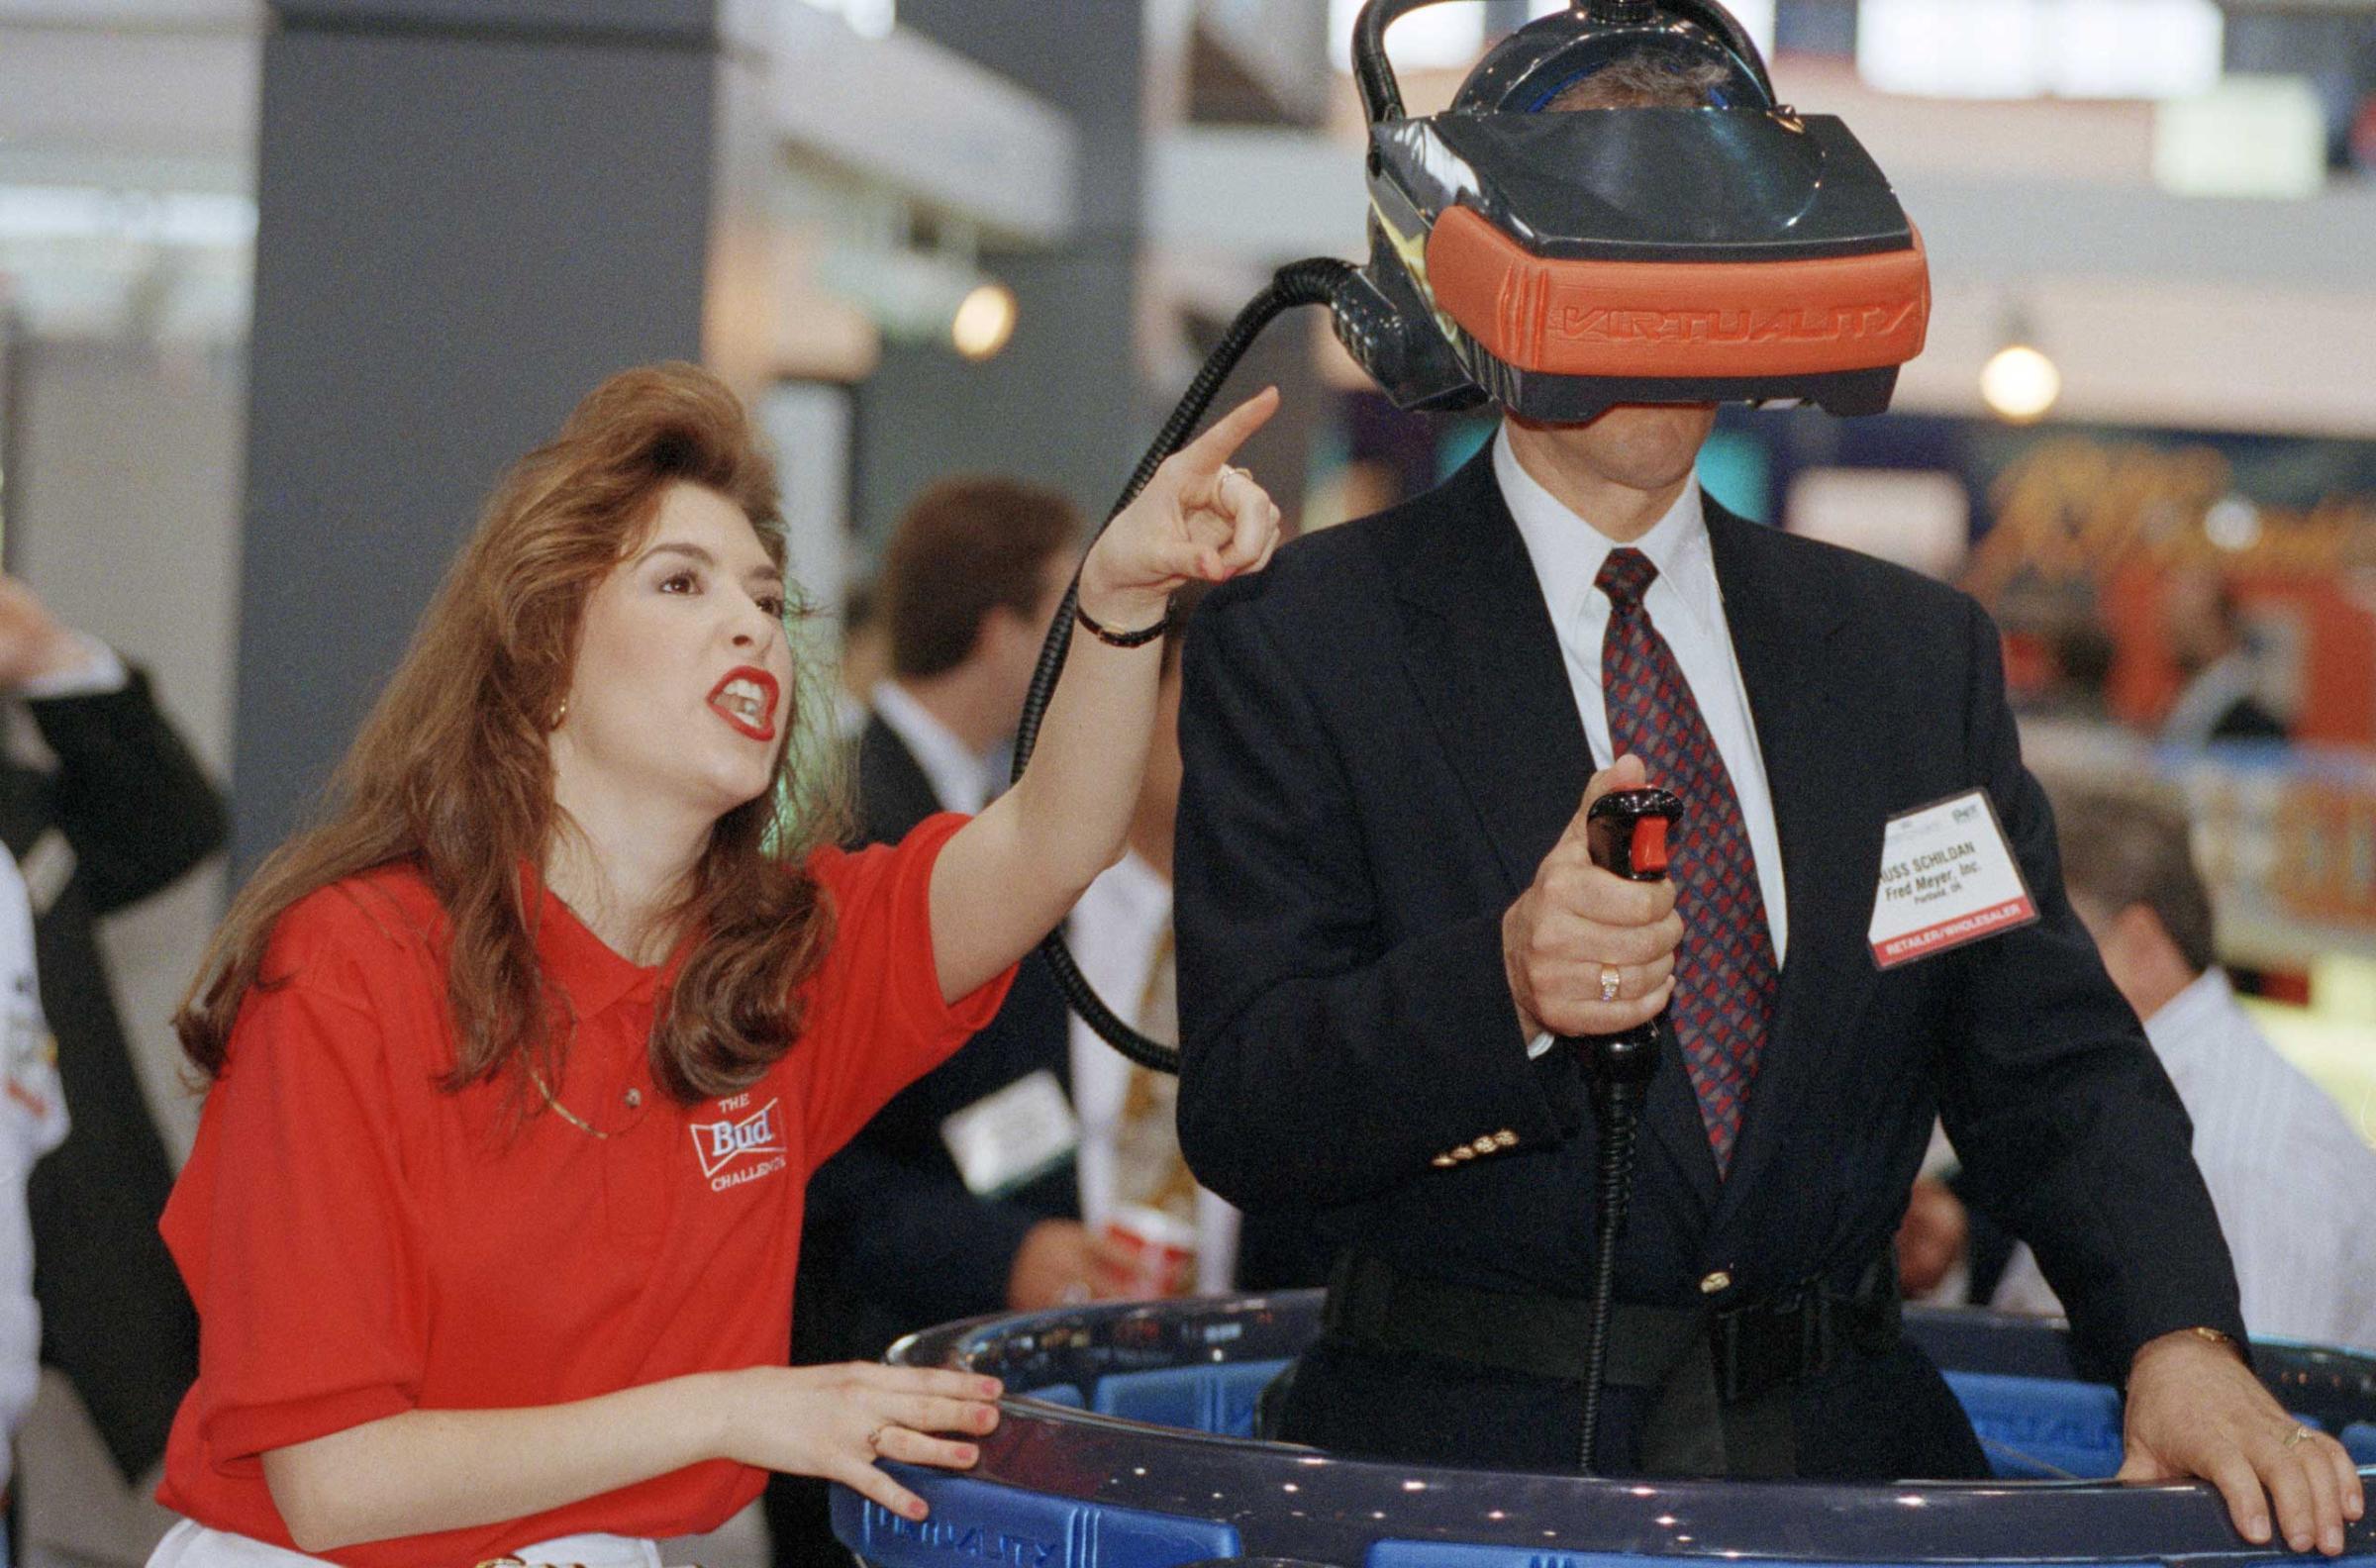 The 3-player Budweiser virtual reality mask at the Food Marketing Institute's International Supermarket Industry Convention and Educational Expostion in Chicago.